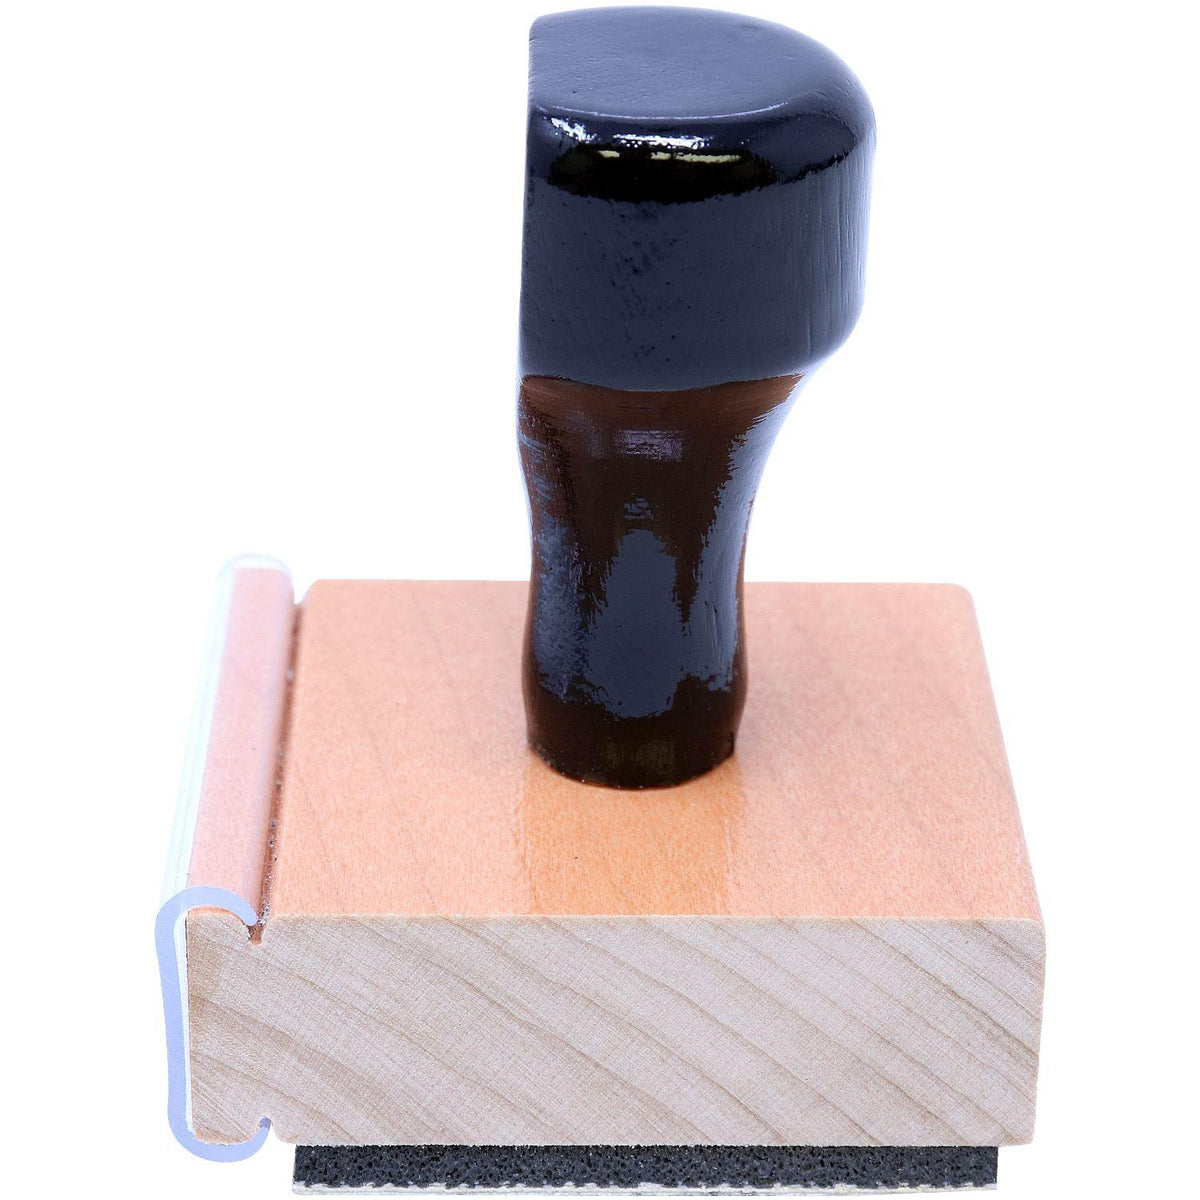 Public Weighmaster Regular Rubber Stamp of Seal - Engineer Seal Stamps - Stamp Type_Hand Stamp, Type of Use_Professional